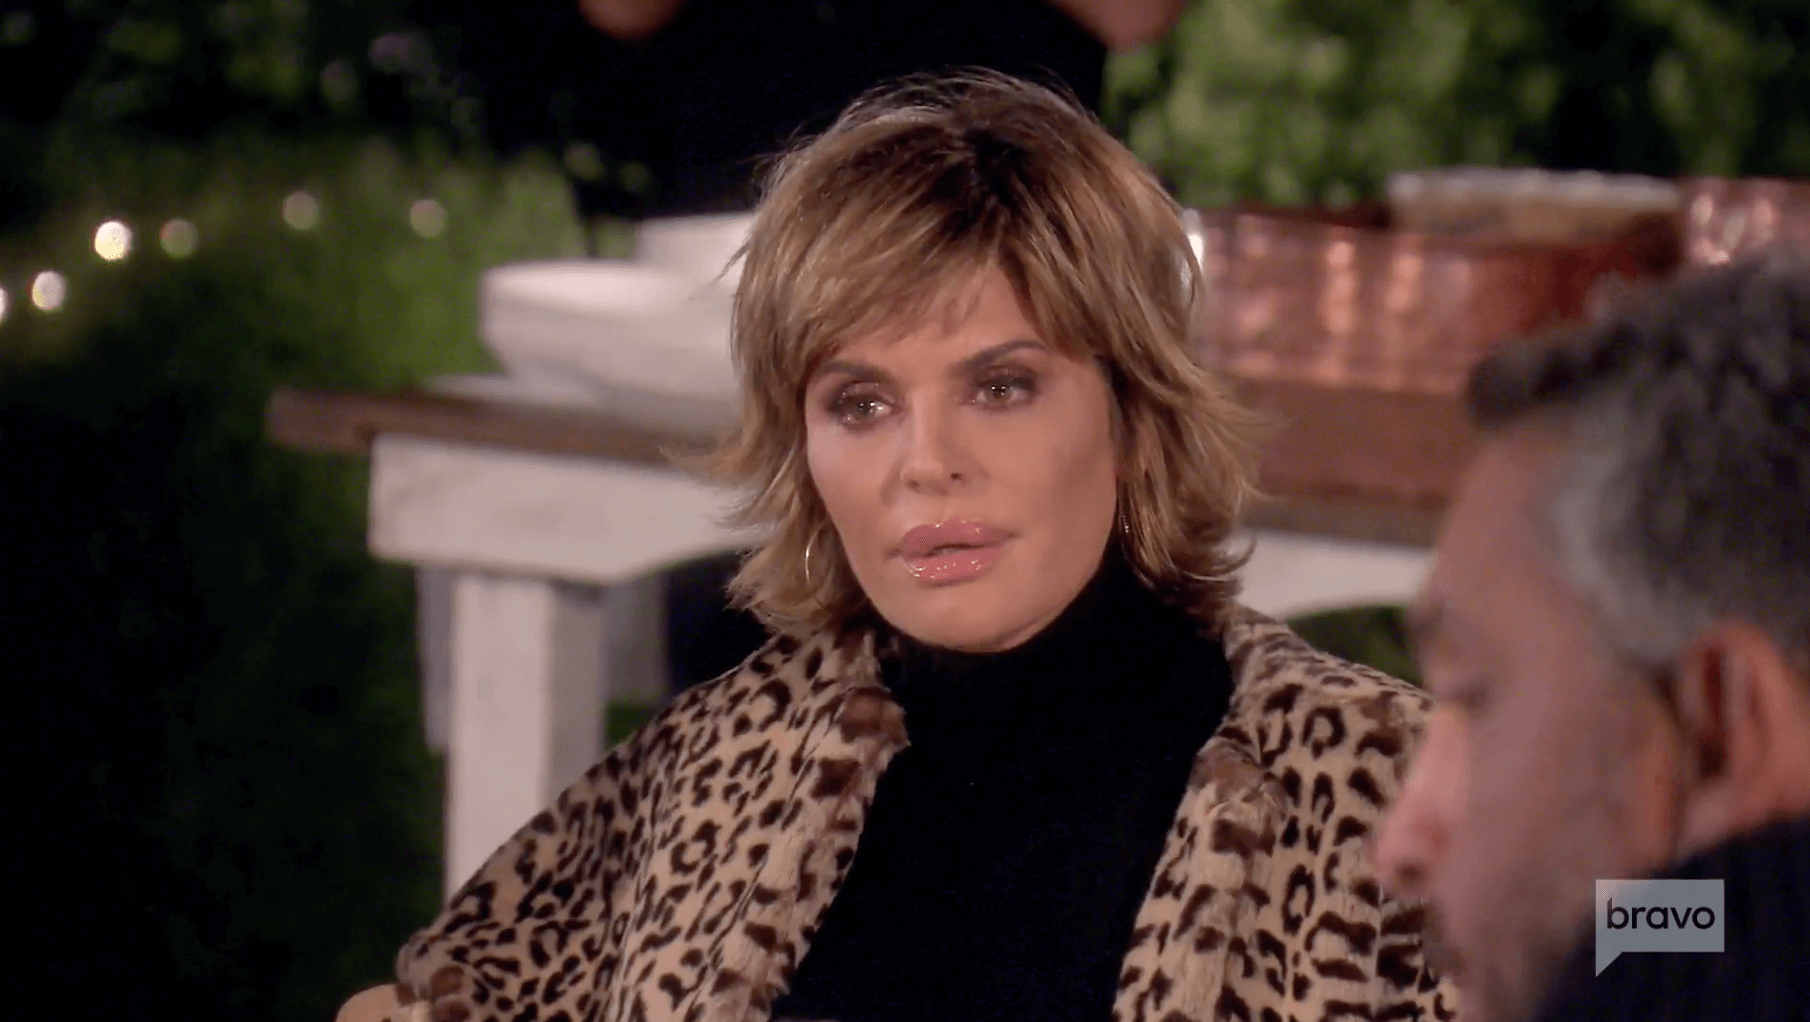 ‘RHOBH’ Star Lisa Rinna Pokes Fun At Kanye West & Announces She’s Running For President!